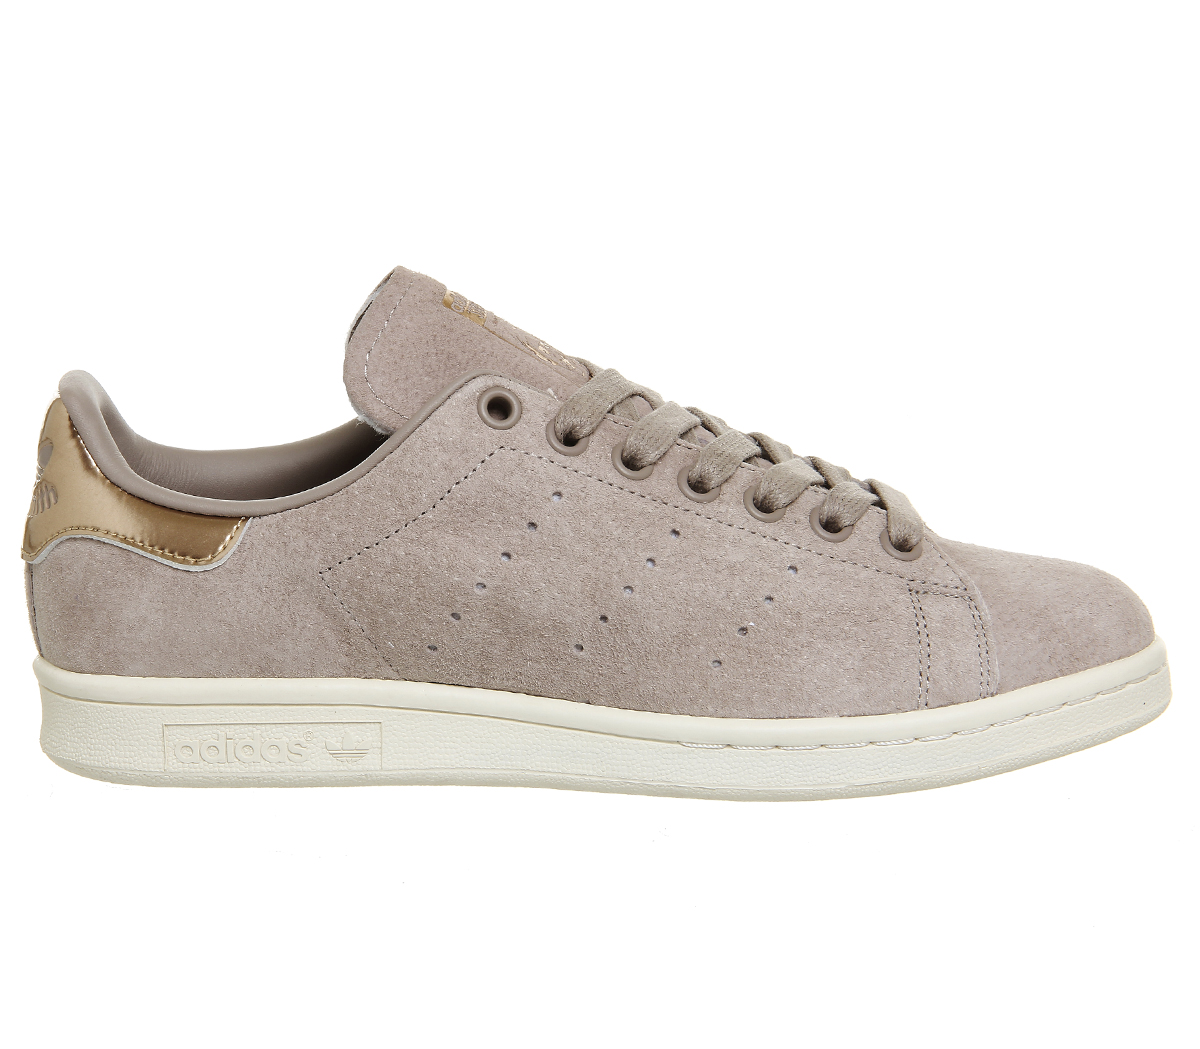 adidas Stan Smith Vapour Grey Copper Exclusive - Women's Trainers